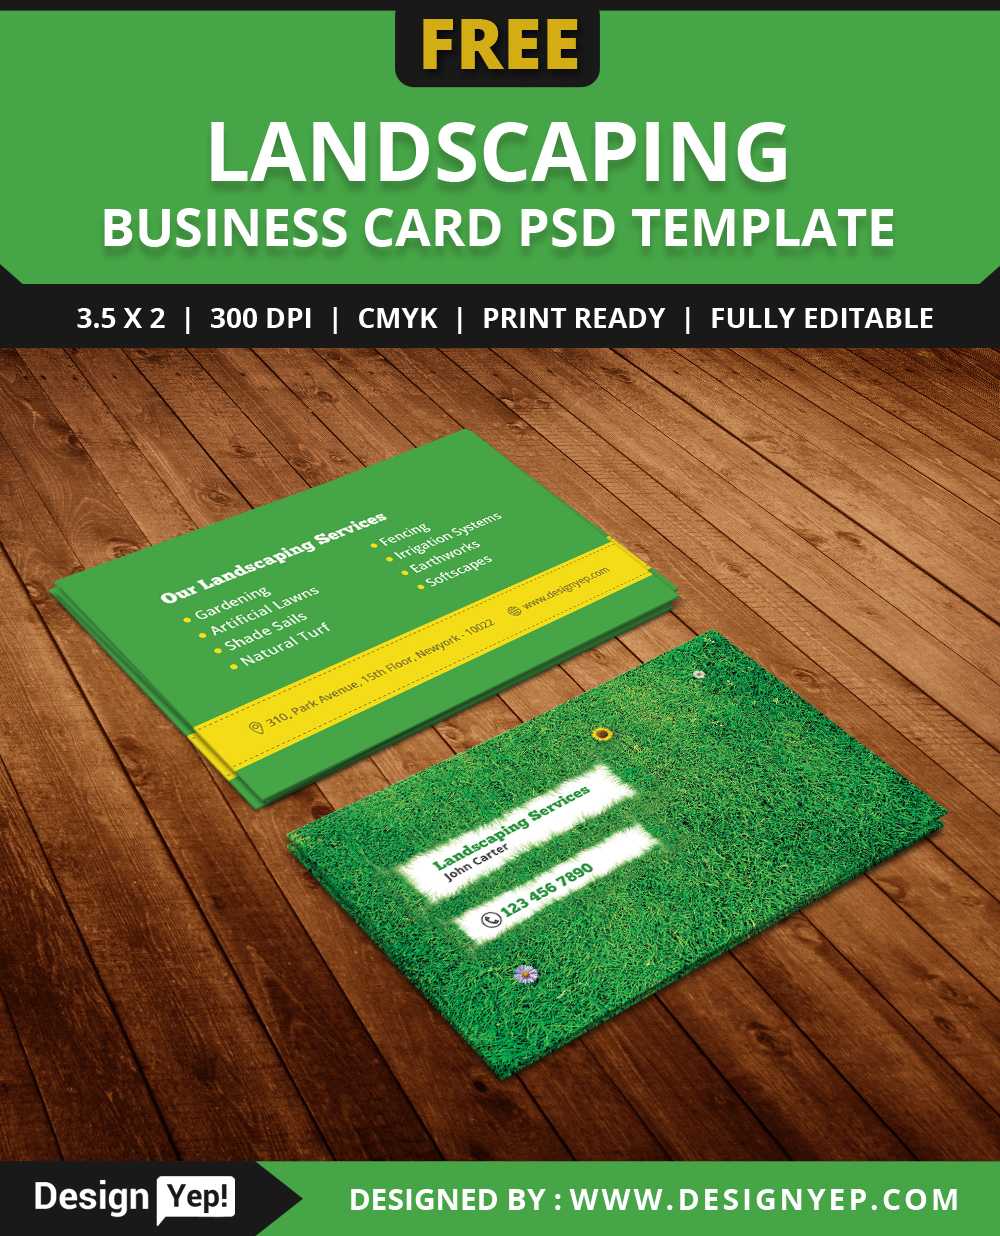 Free Landscaping Business Card Template Psd - Designyep Regarding Landscaping Business Card Template